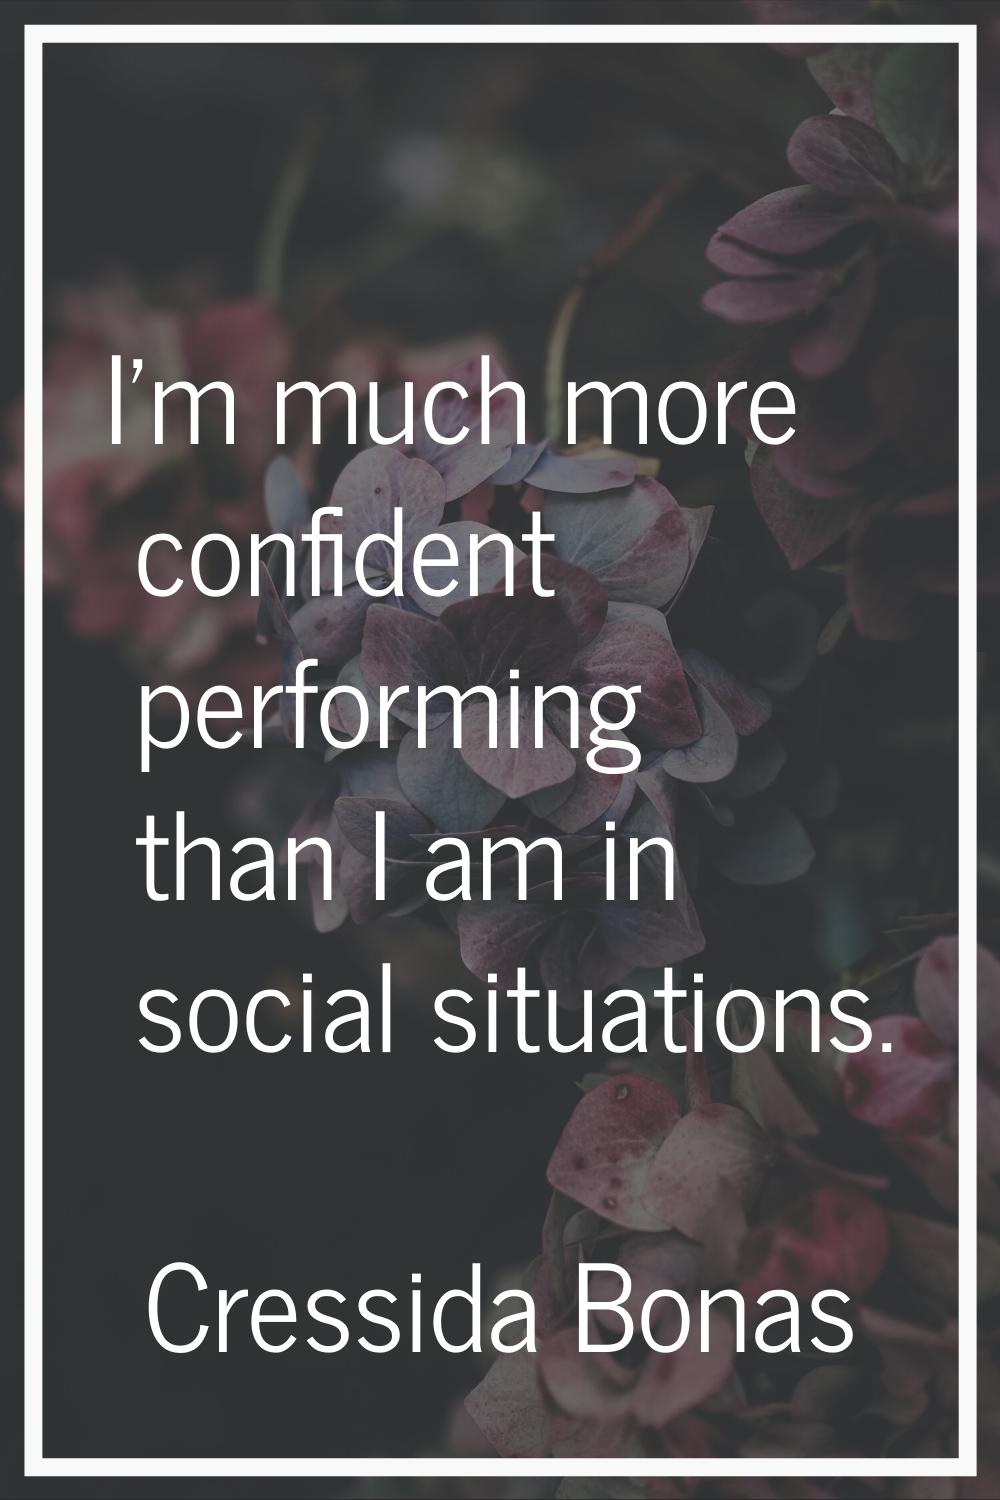 I'm much more confident performing than I am in social situations.